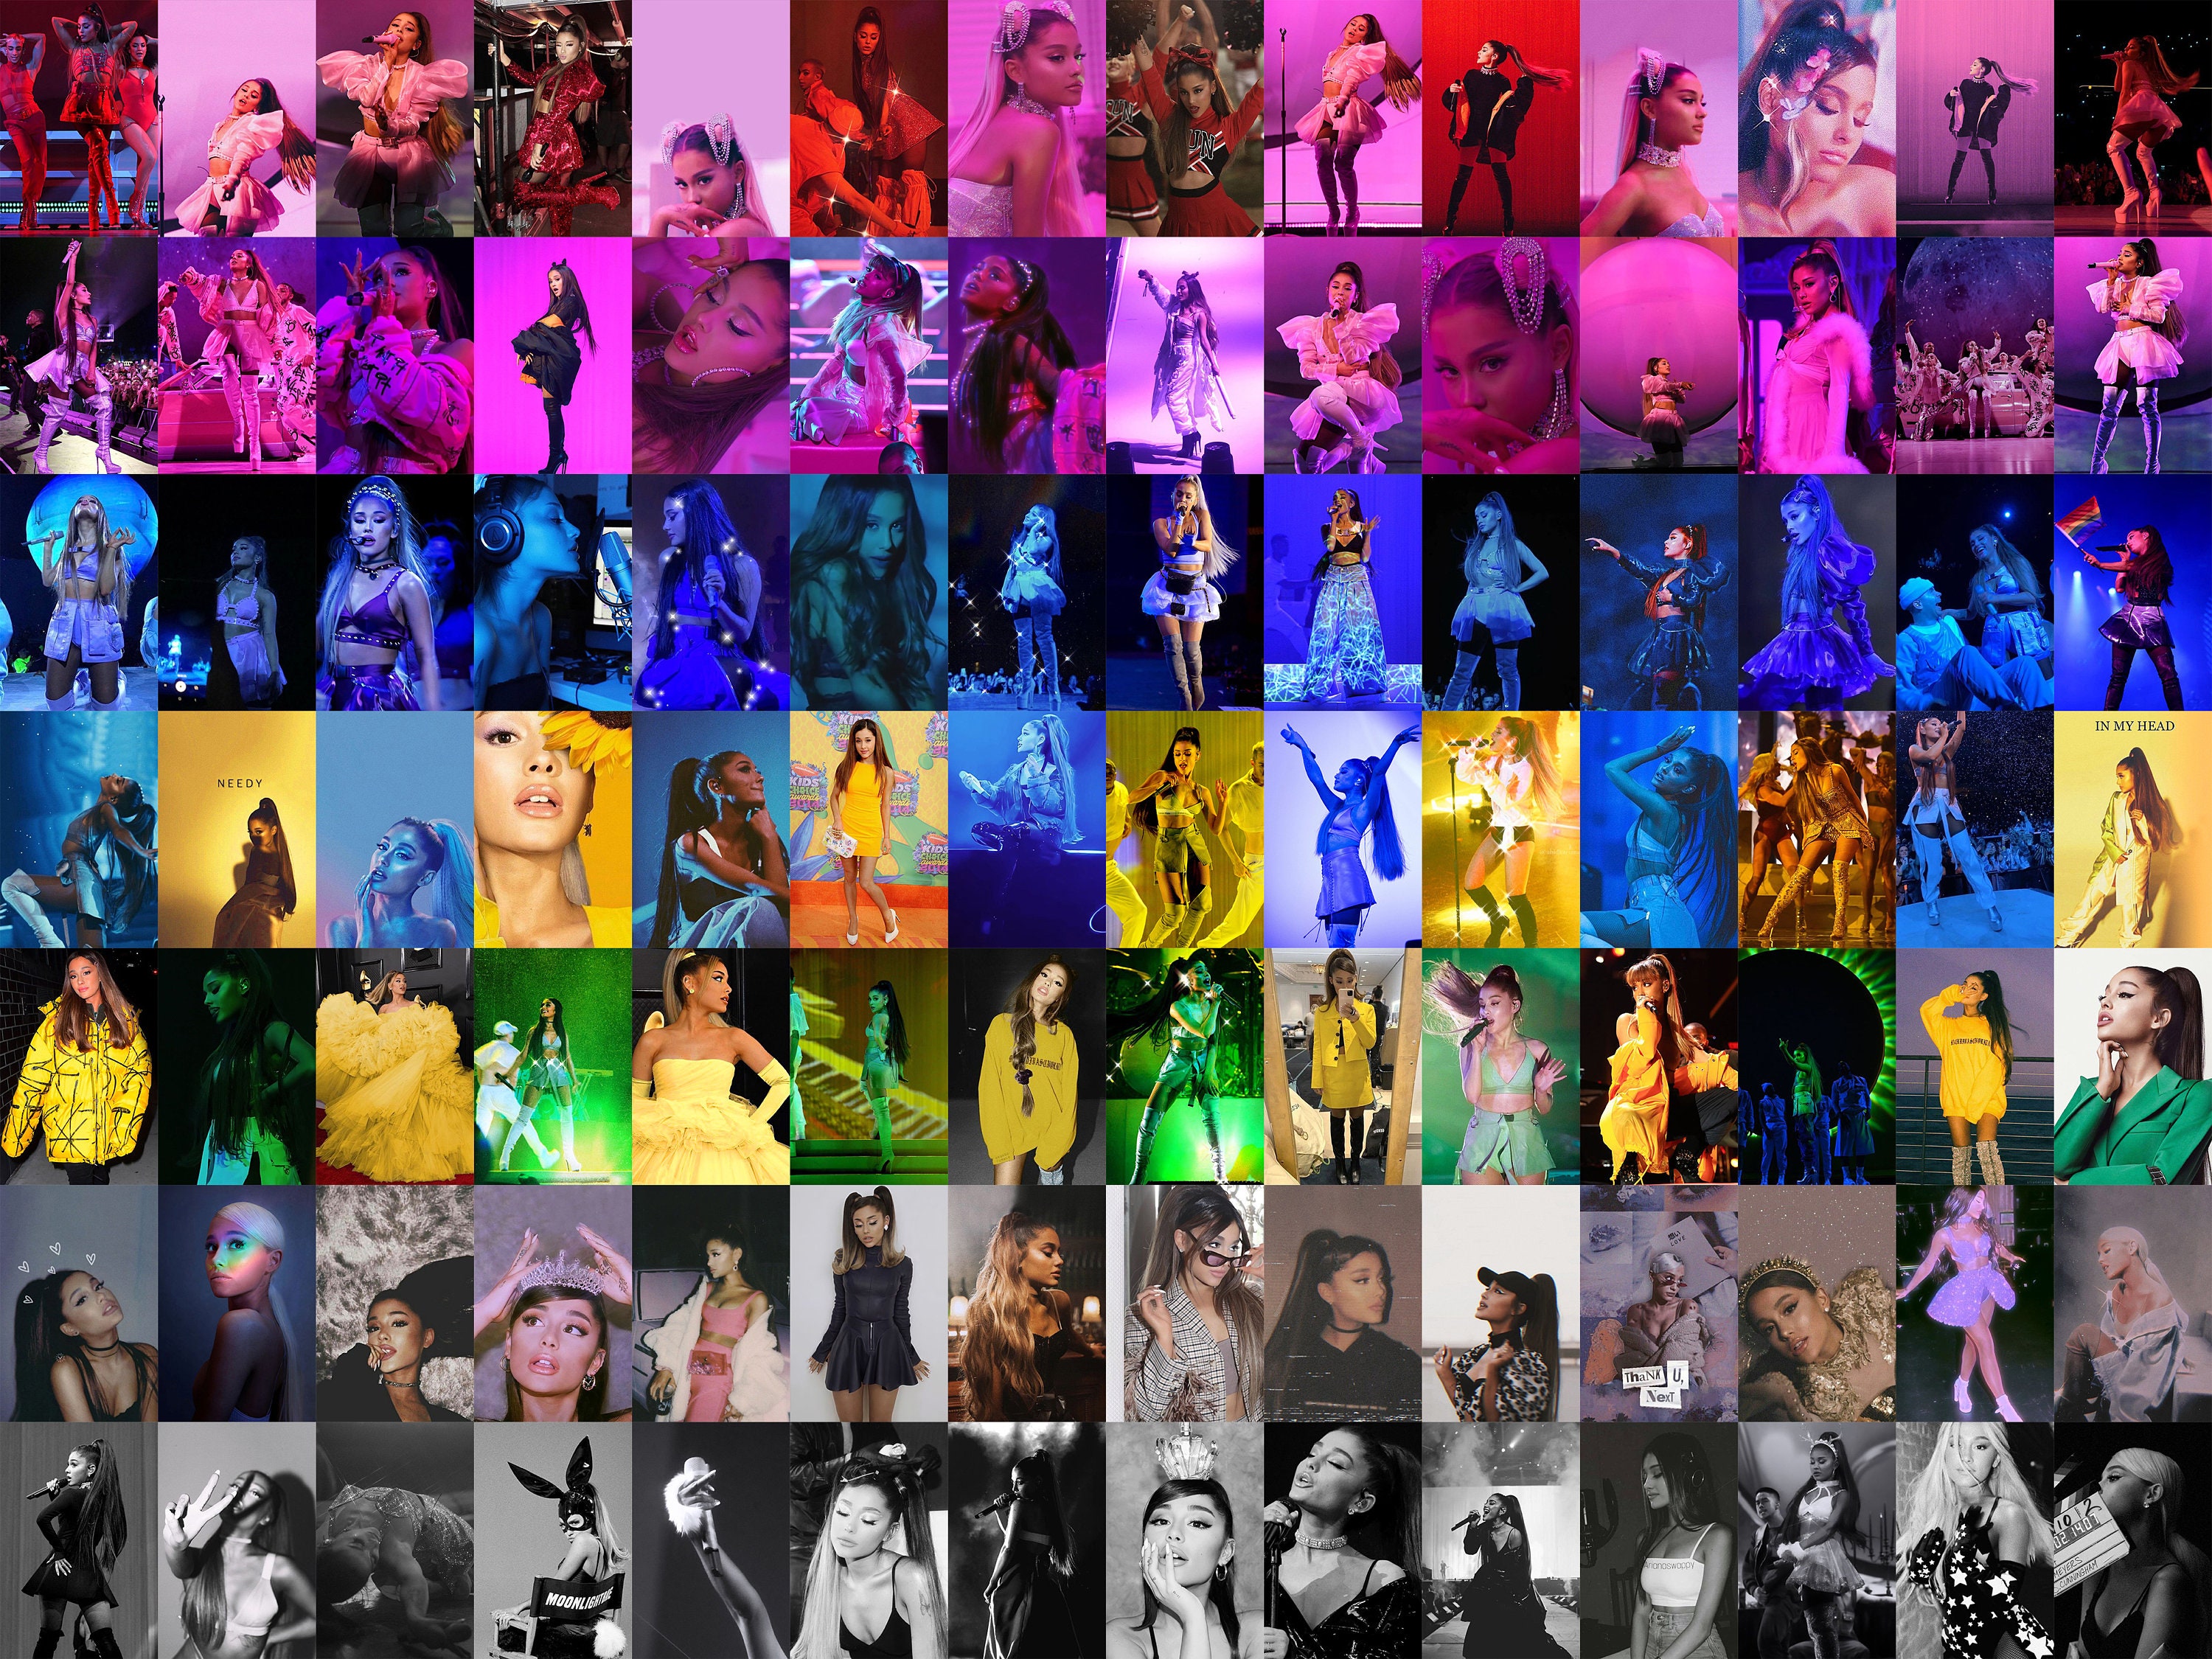 A collage of Ariana Grande in different outfits and on stage. - Ariana Grande